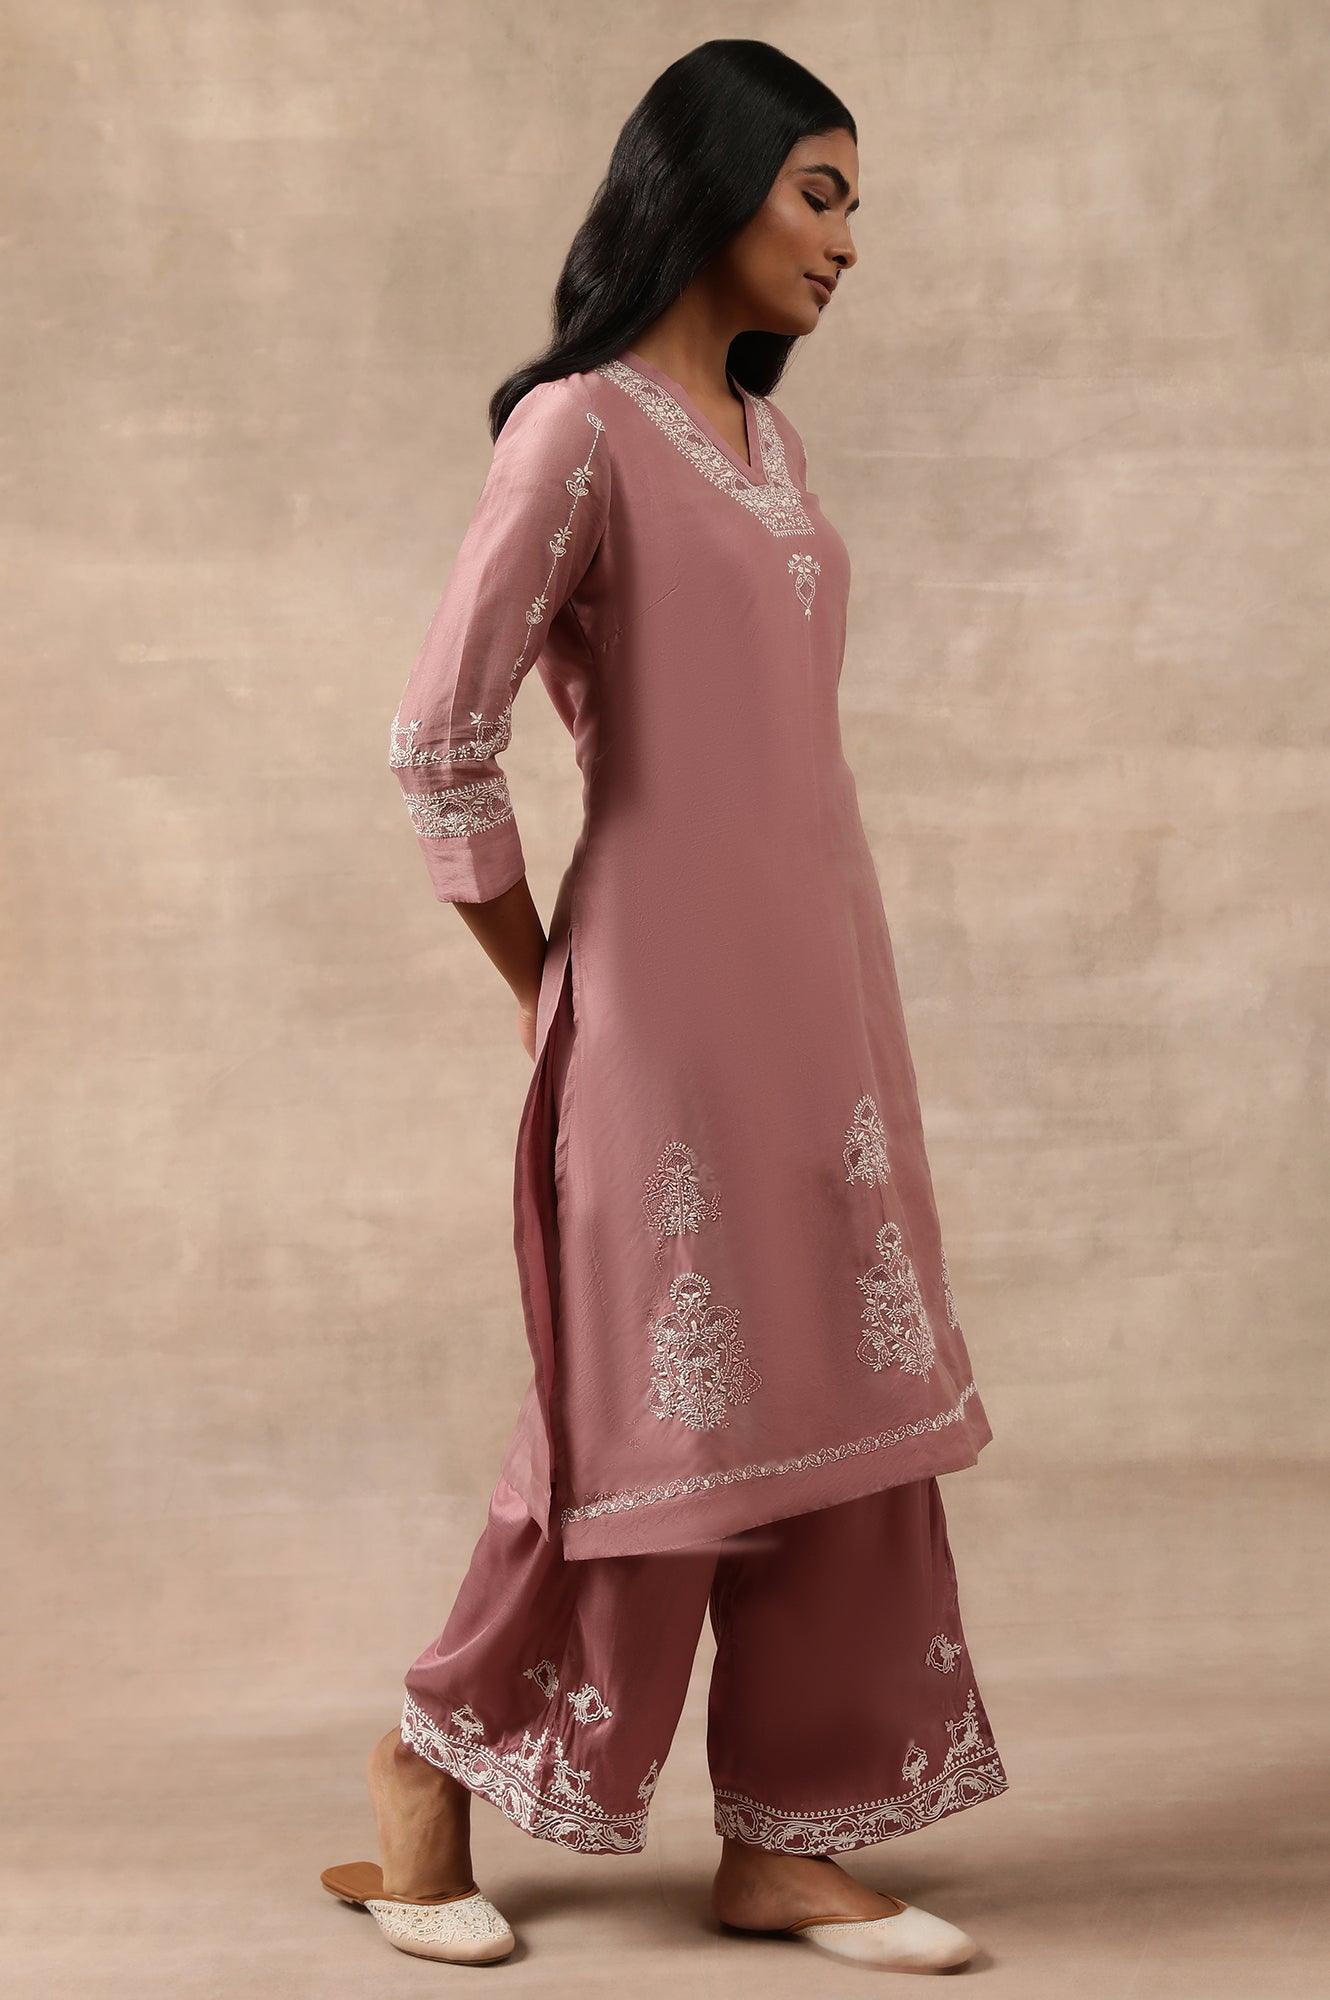 Pink Parallel Pants With Dori Embroidery At Hem - wforwoman